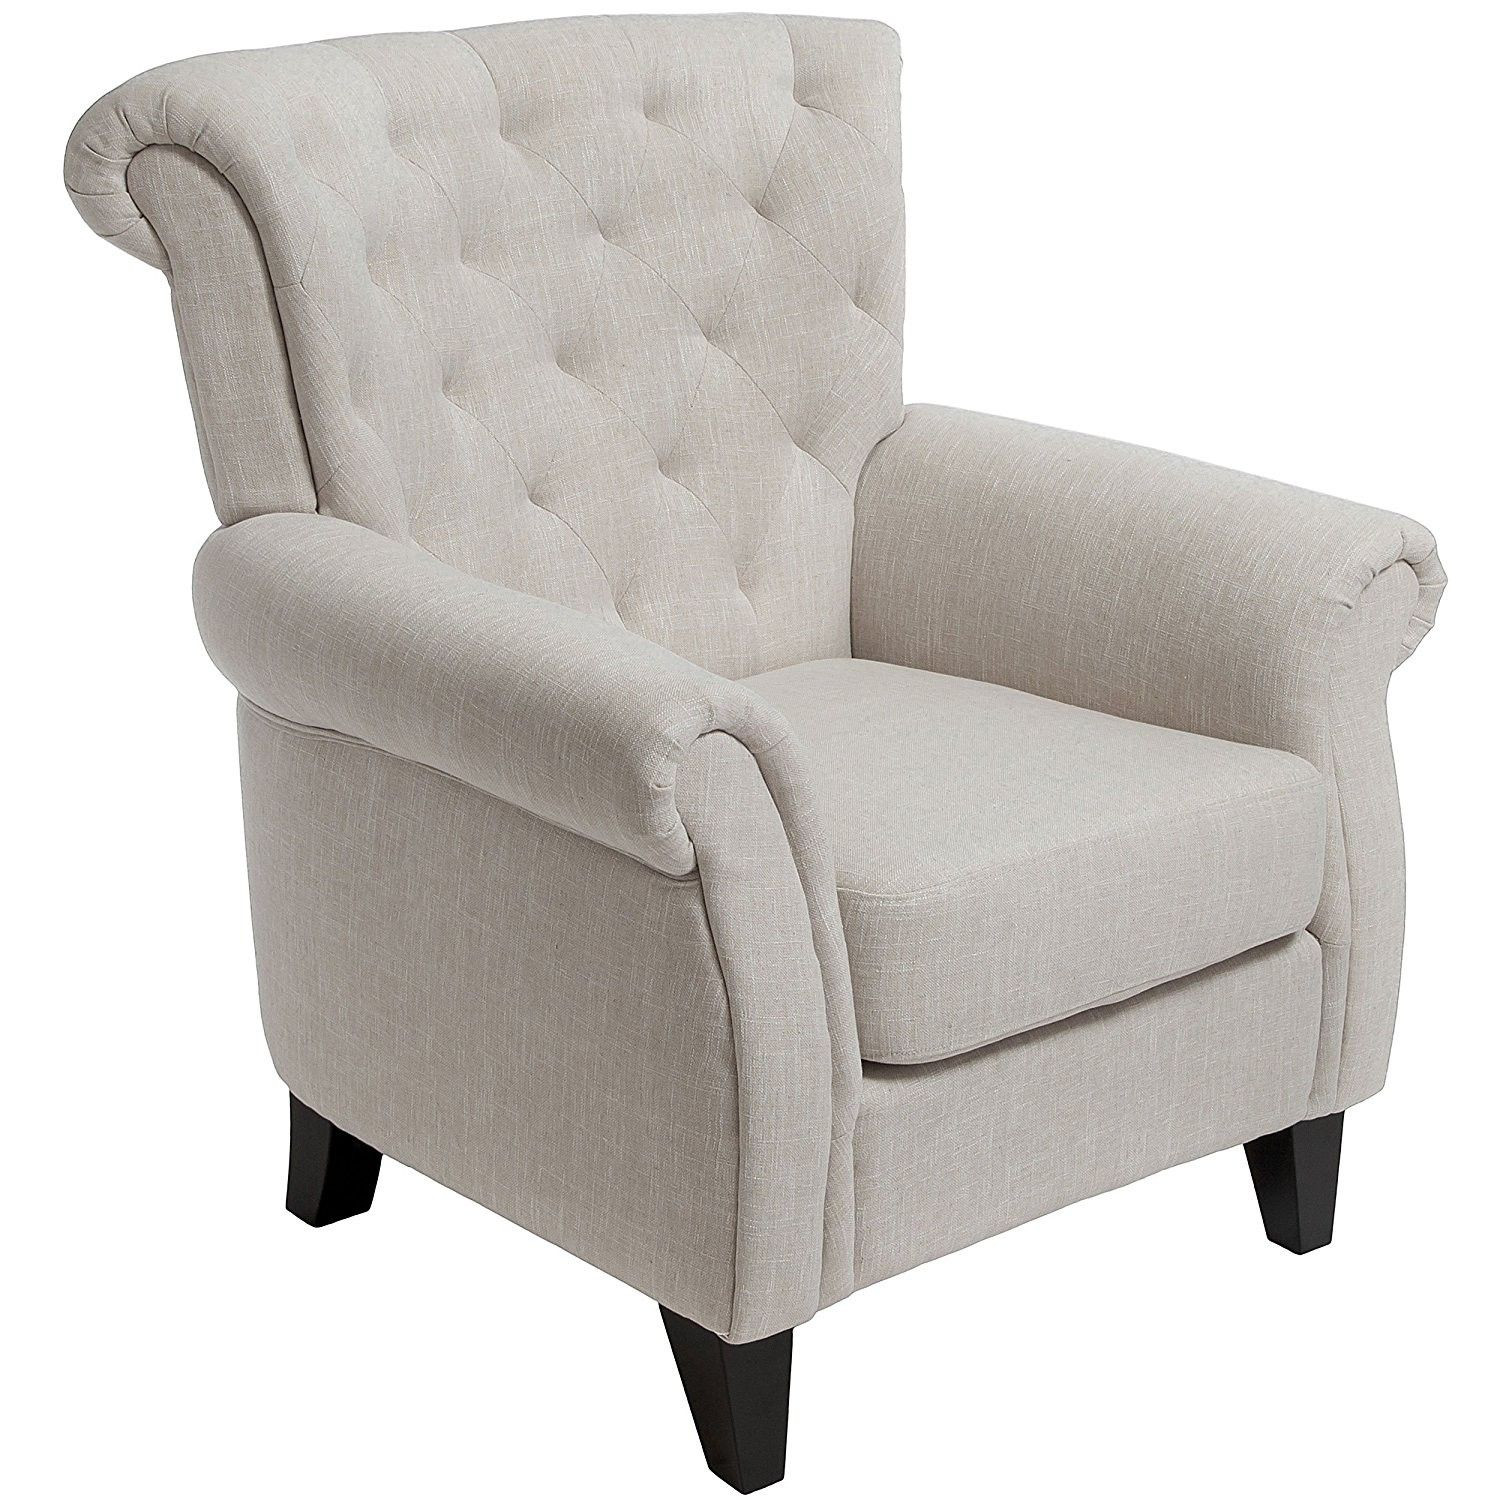 Small Accent Chairs For Bedroom
 Arm Chair Small Bedroom Chairs Ikea Small Accent Chair